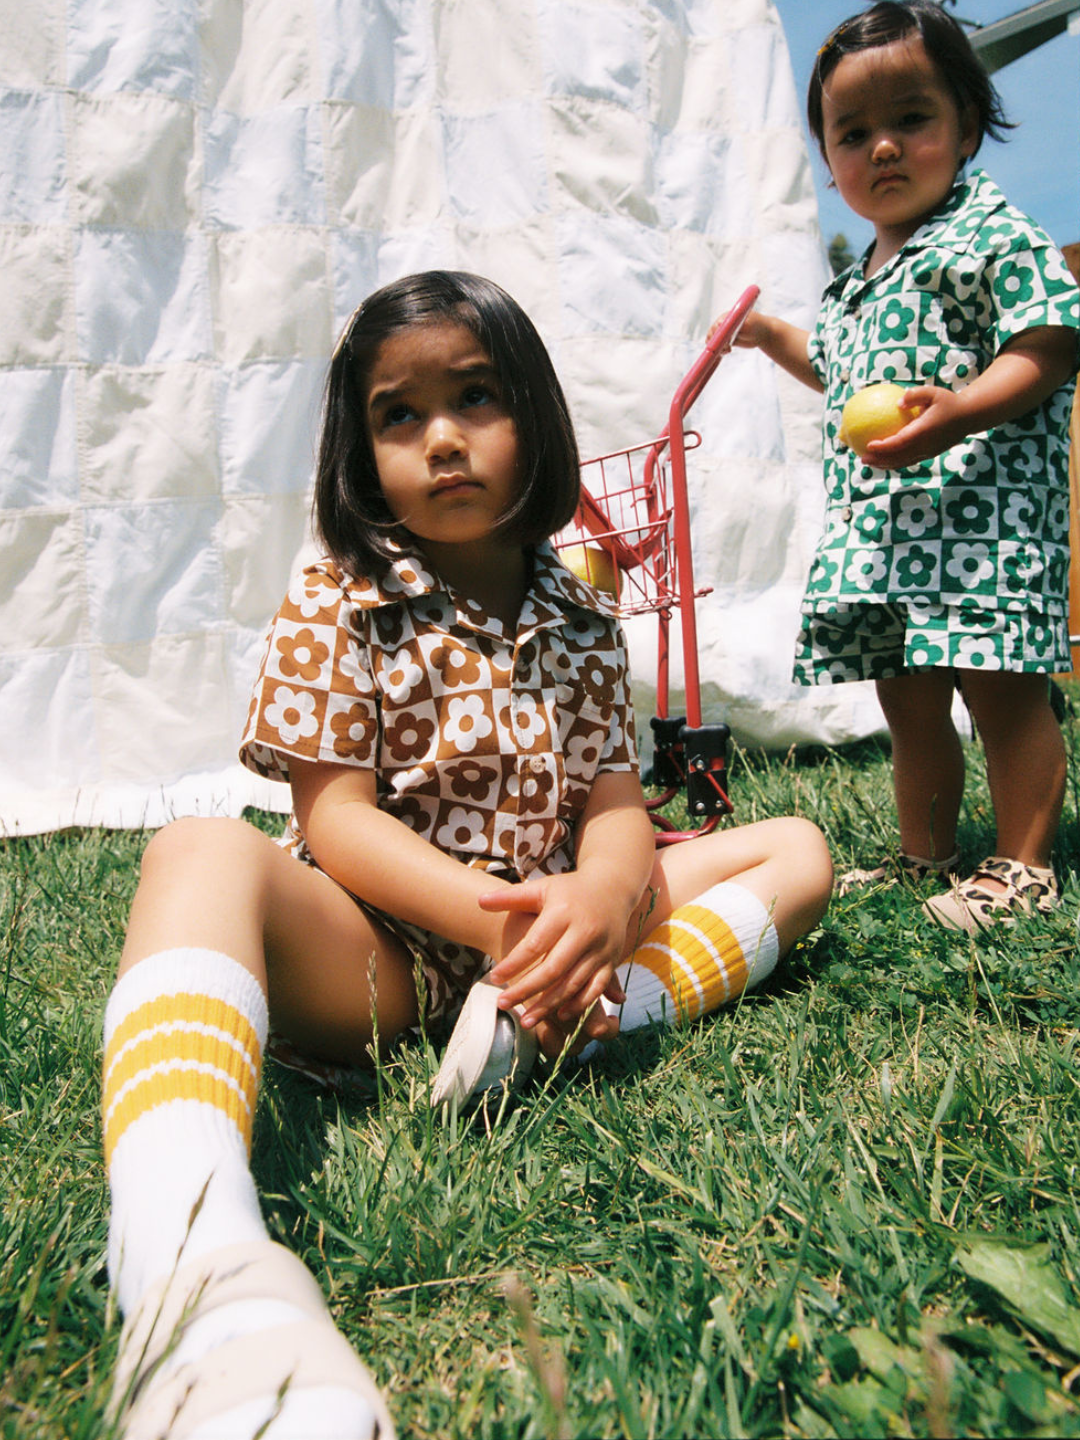 Terracotta | Two children on the grass wearing kids' shirt and shorts sets, one in a checkerboard pattern of terracotta and white flowers, the other with green and white flowers